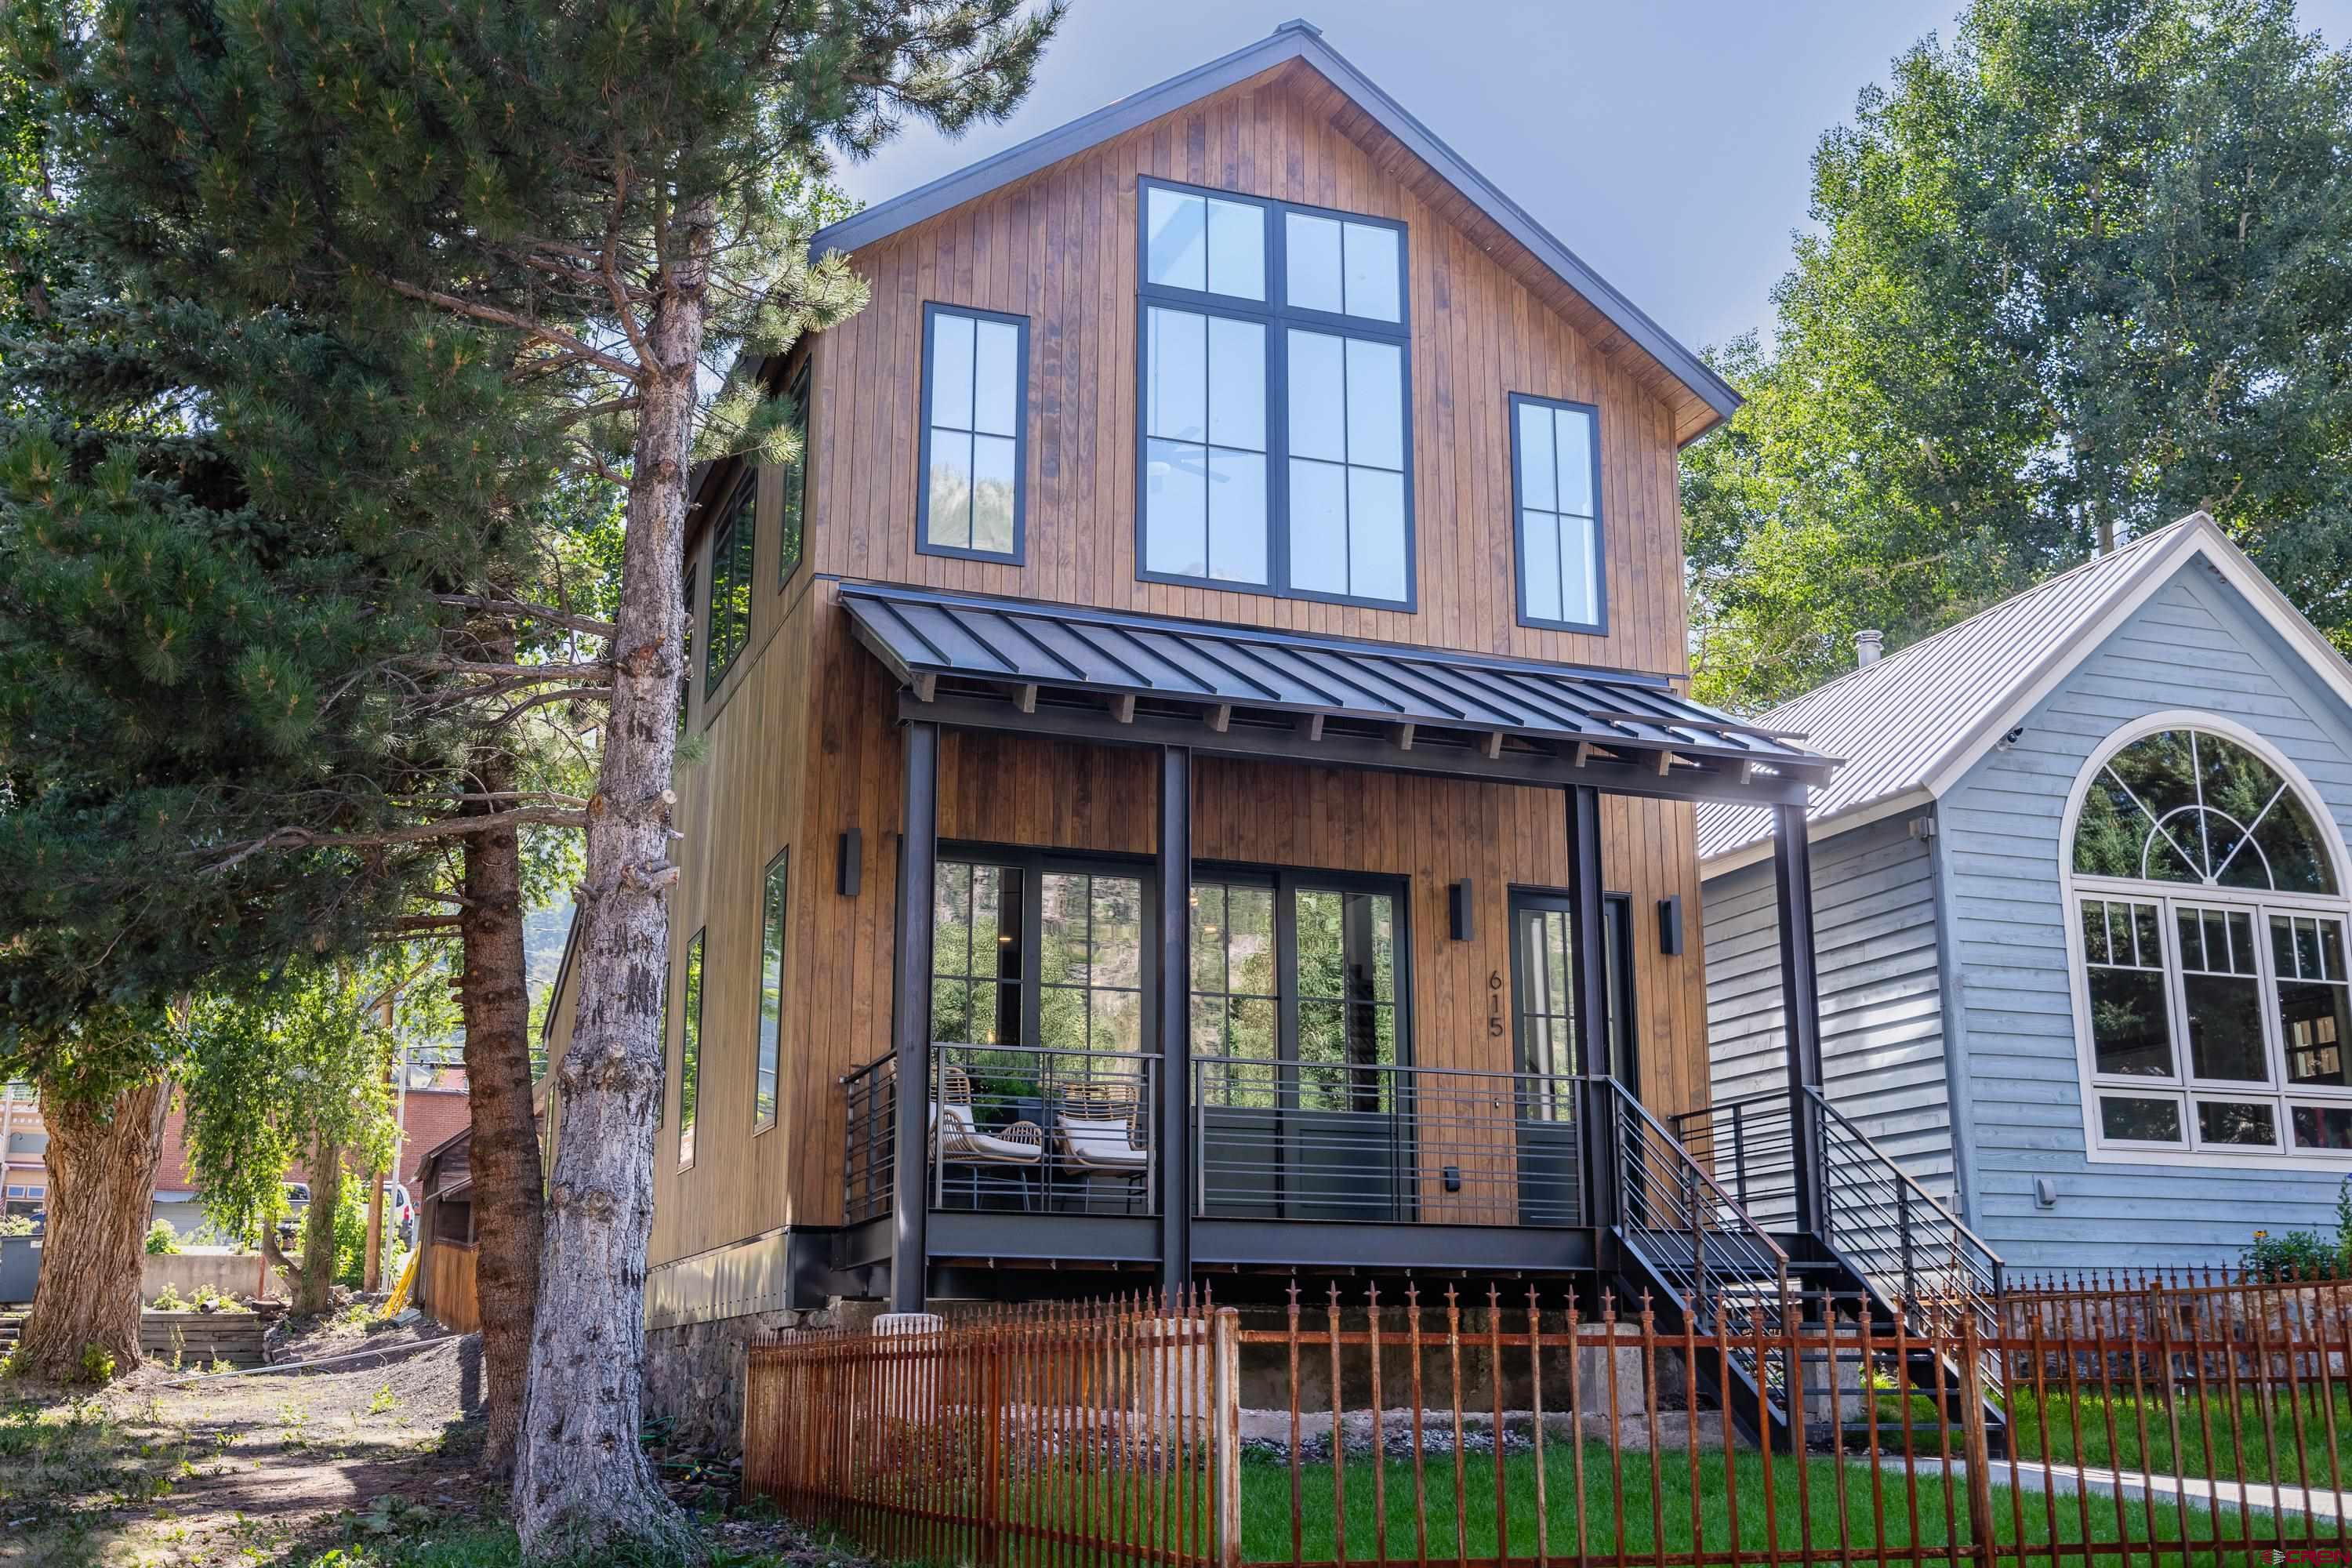 Located in the heart of downtown Ouray, come see this mountain modern home that blends functionality, unmatched views and design. This exceptional home was inspired by the surrounding mountains and effortlessly frames the iconic Cascade Falls in almost every room. The open floor plan and indoor/outdoor living make this a entertainers dream. The master bedroom is located on the main floor with a custom ensuite and a attached patio to sit and enjoy the amphitheater views.  With 2 bedrooms, 1 bathroom and a media room upstairs there is plenty of space for your guests. There is custom steel accents throughout the home by local artisan Skol Studios.  The home itself is something to relish, its flawless mountain modern design highlights the preeminent views while ensuring every space is functional & inspiring. Estimated completion date June 2023.